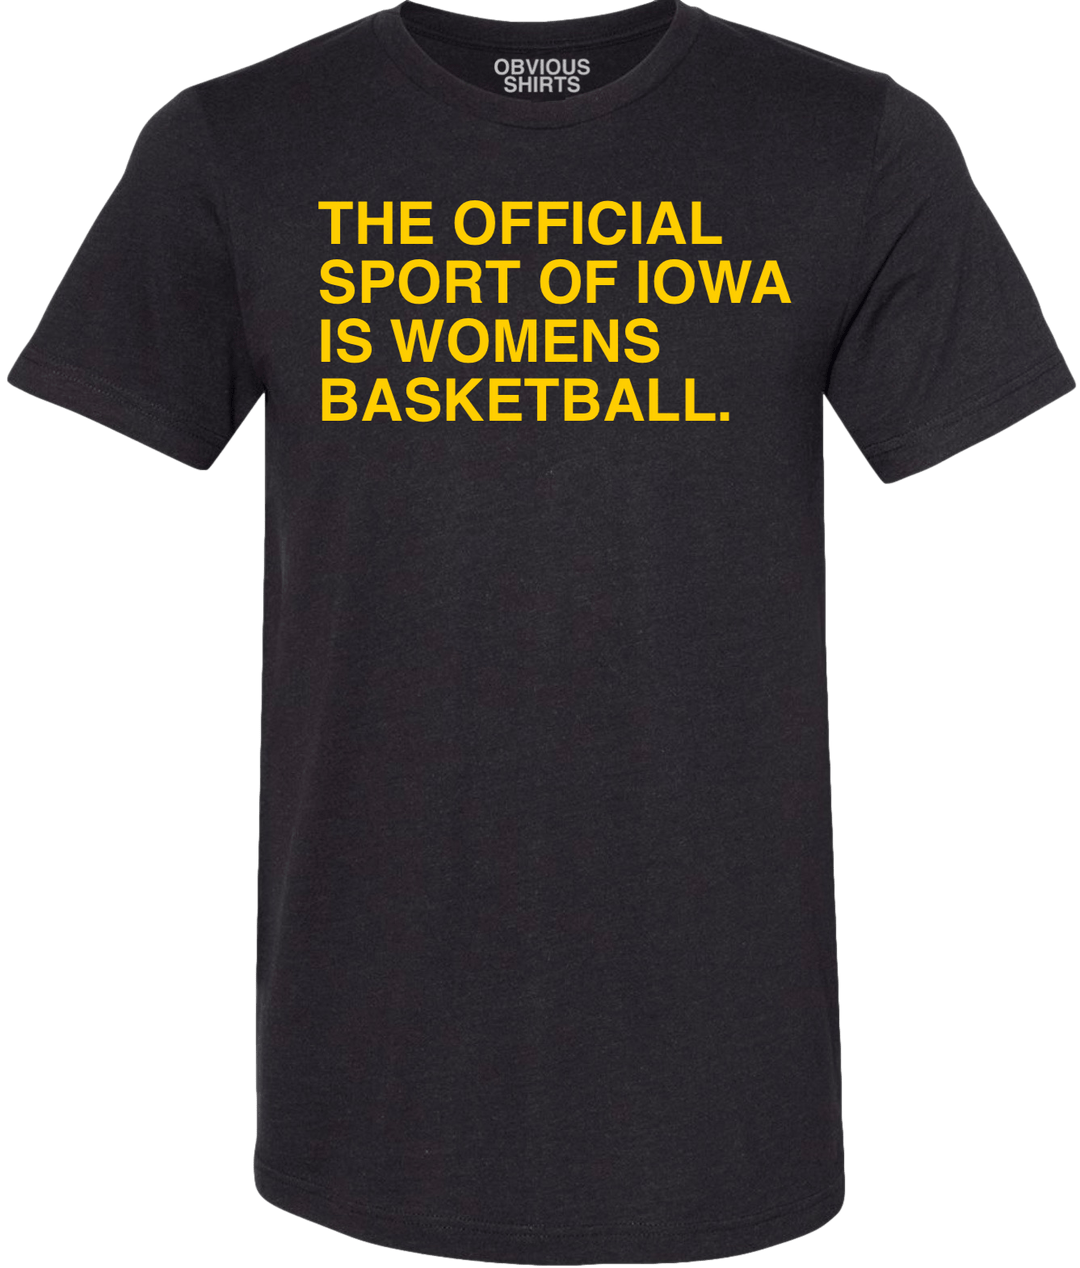 THE OFFICIAL SPORT OF IOWA IS WOMENS BASKETBALL. - OBVIOUS SHIRTS